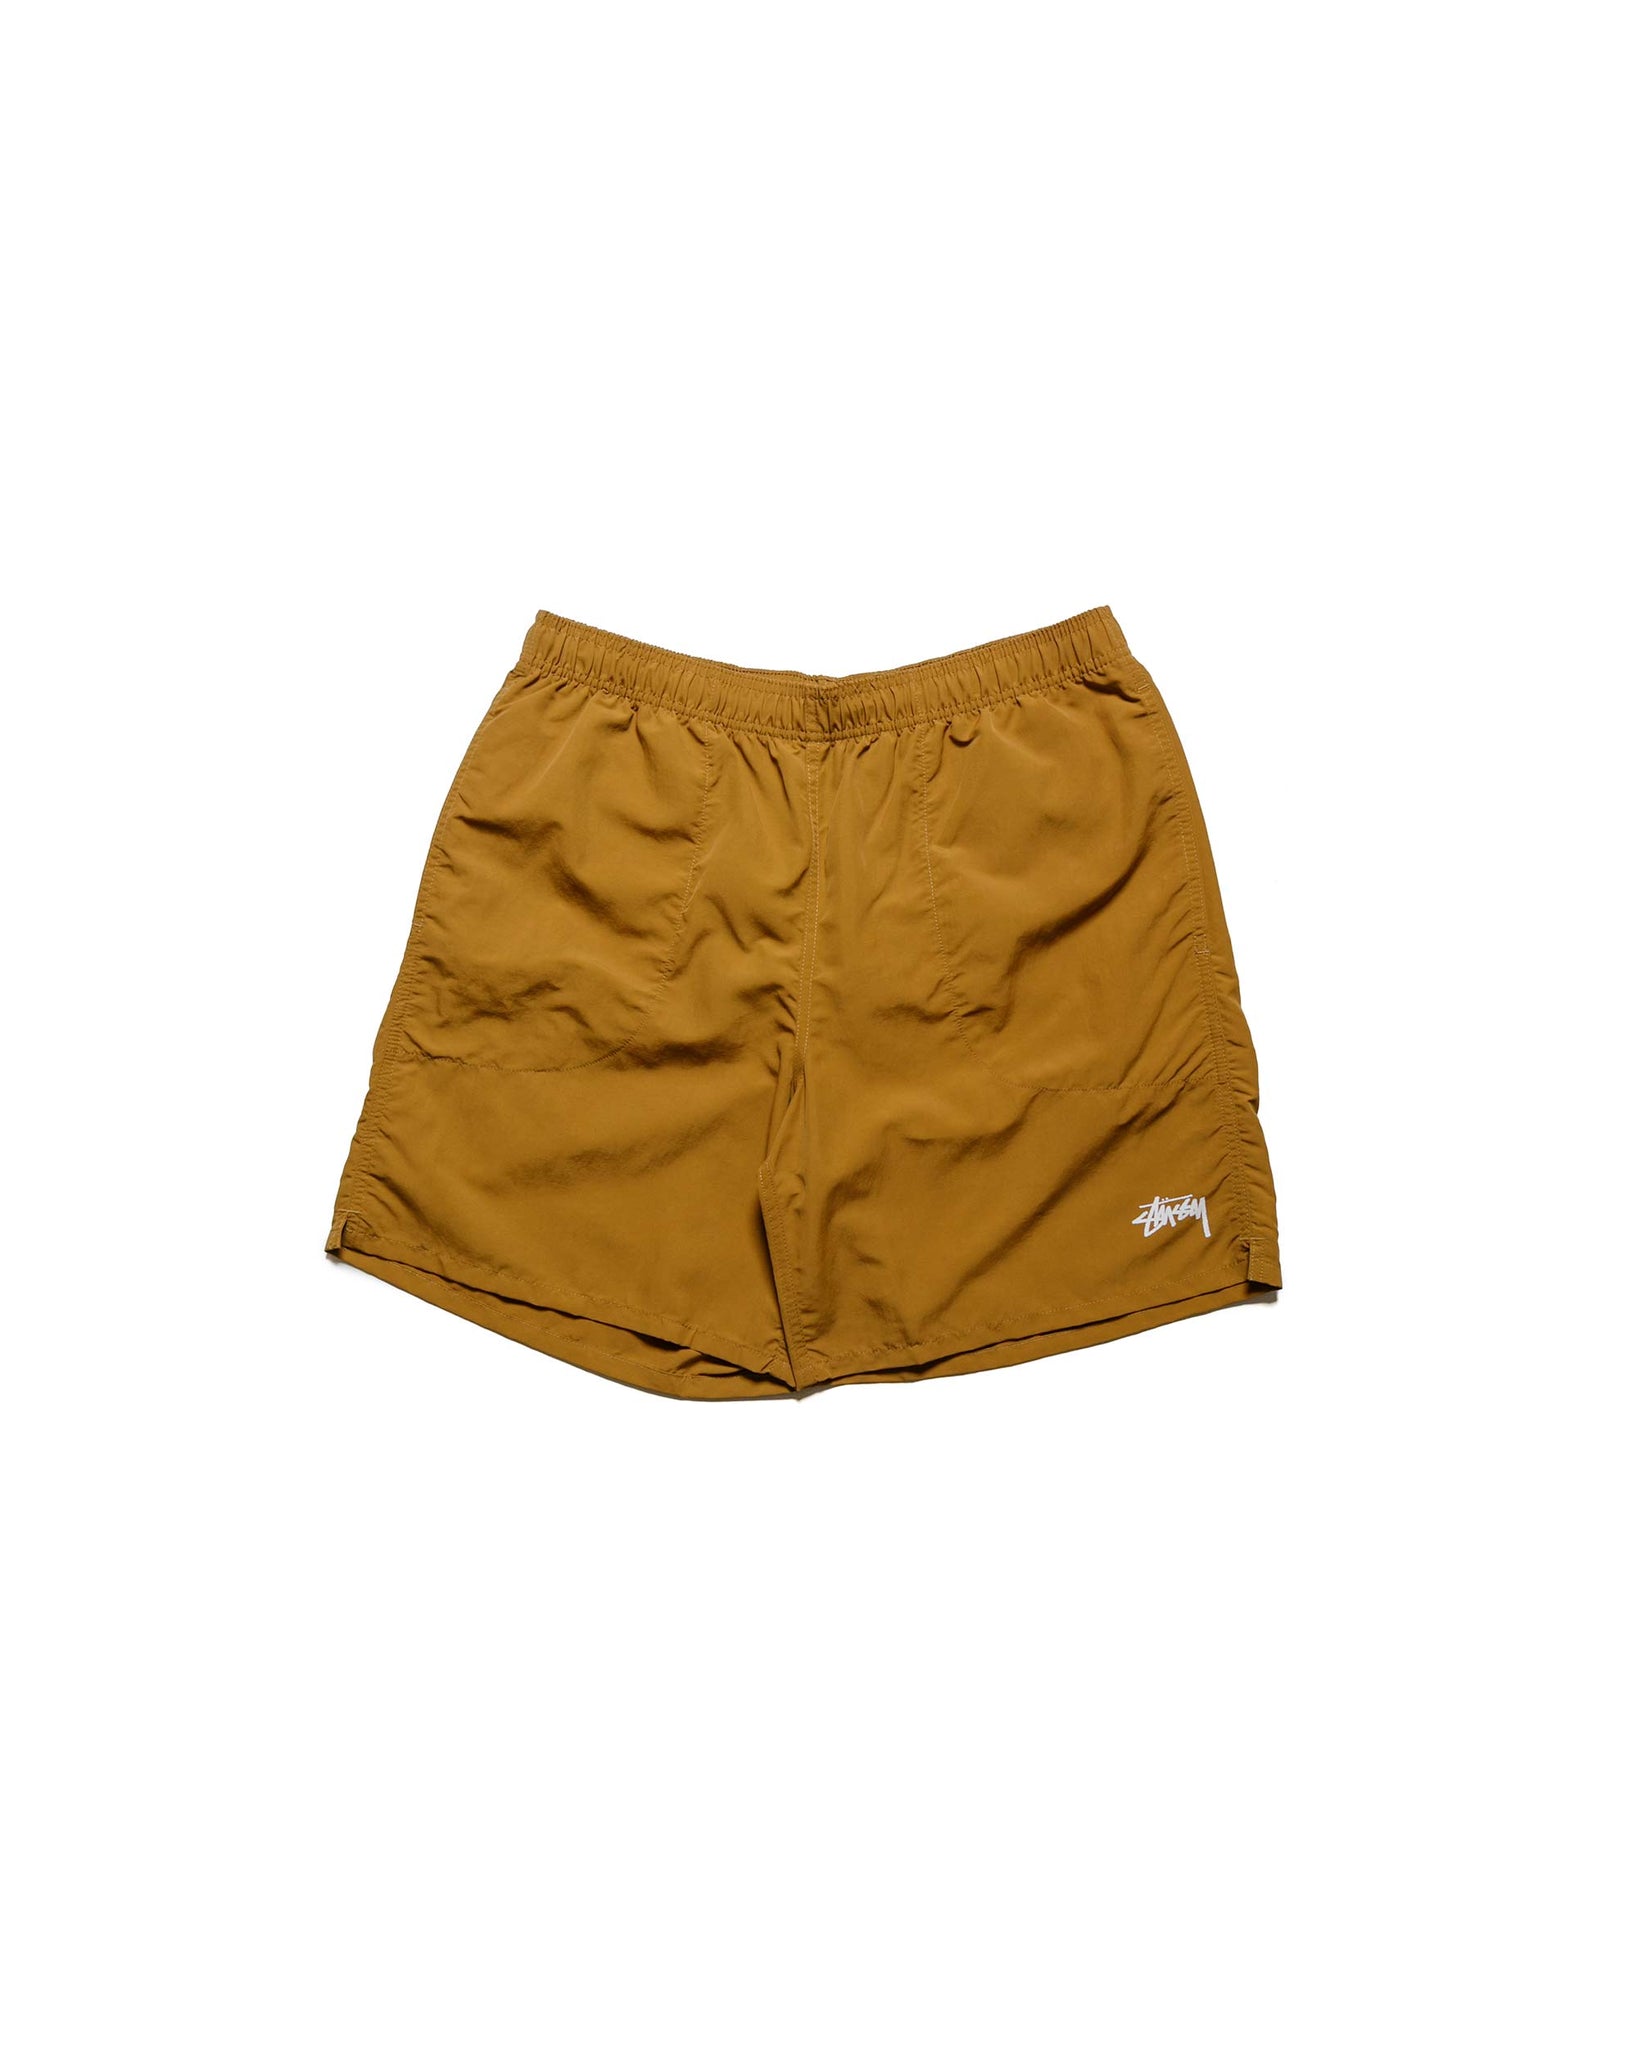 Stüssy Stock Water Short Coyote